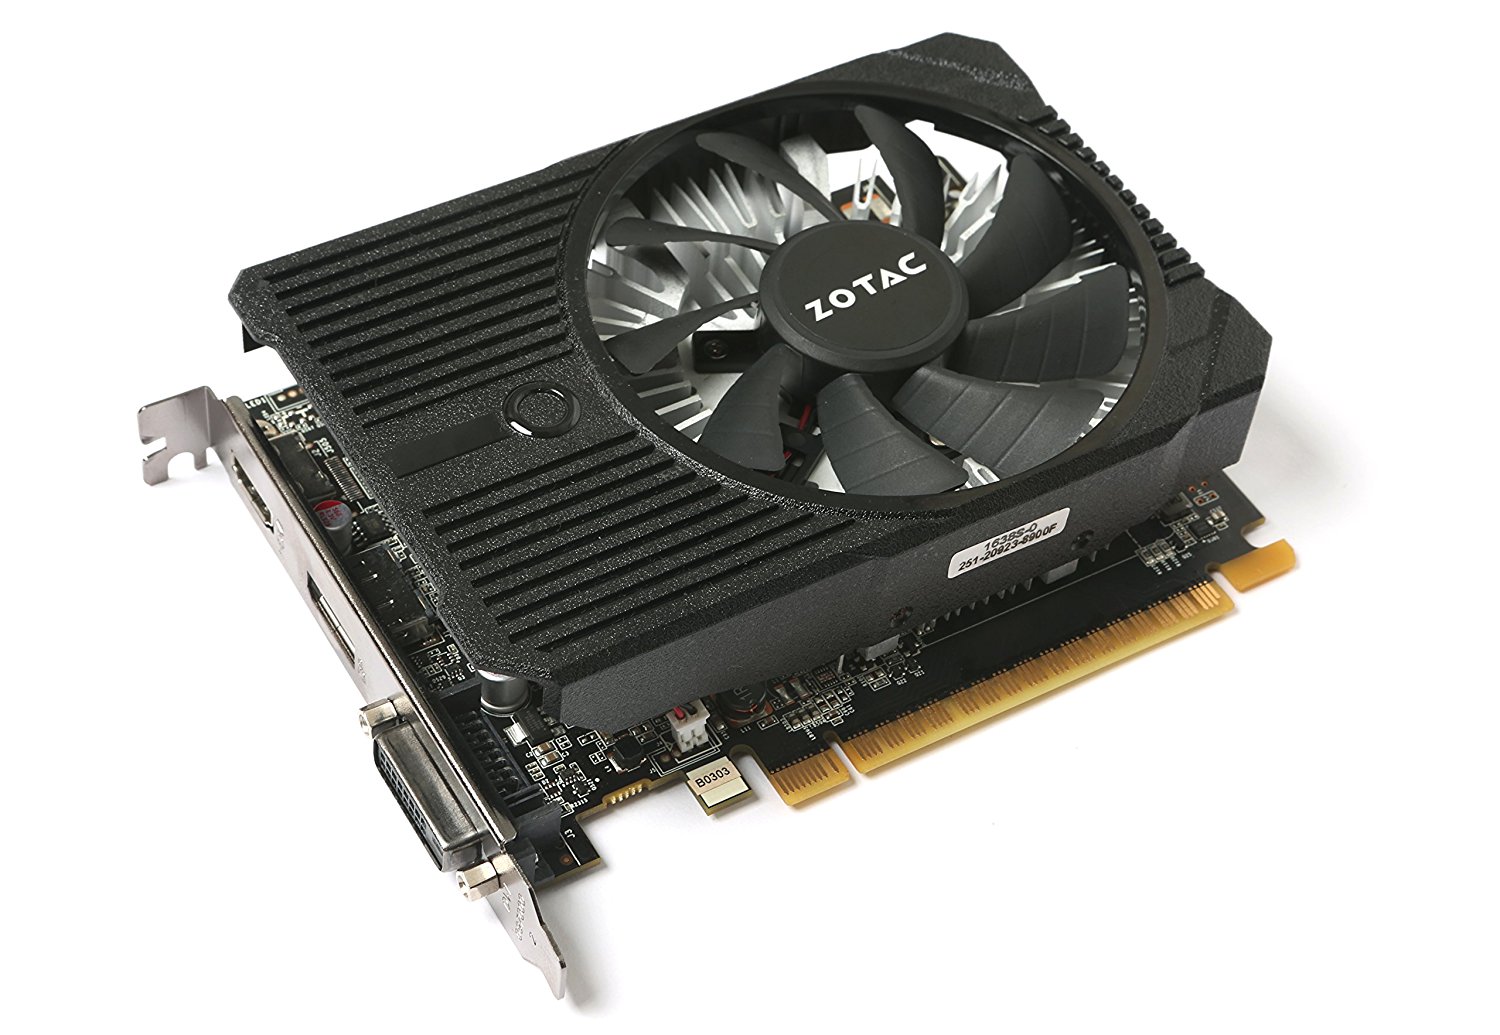 The Best Budget Graphics Card For 720p And 1080p Gaming